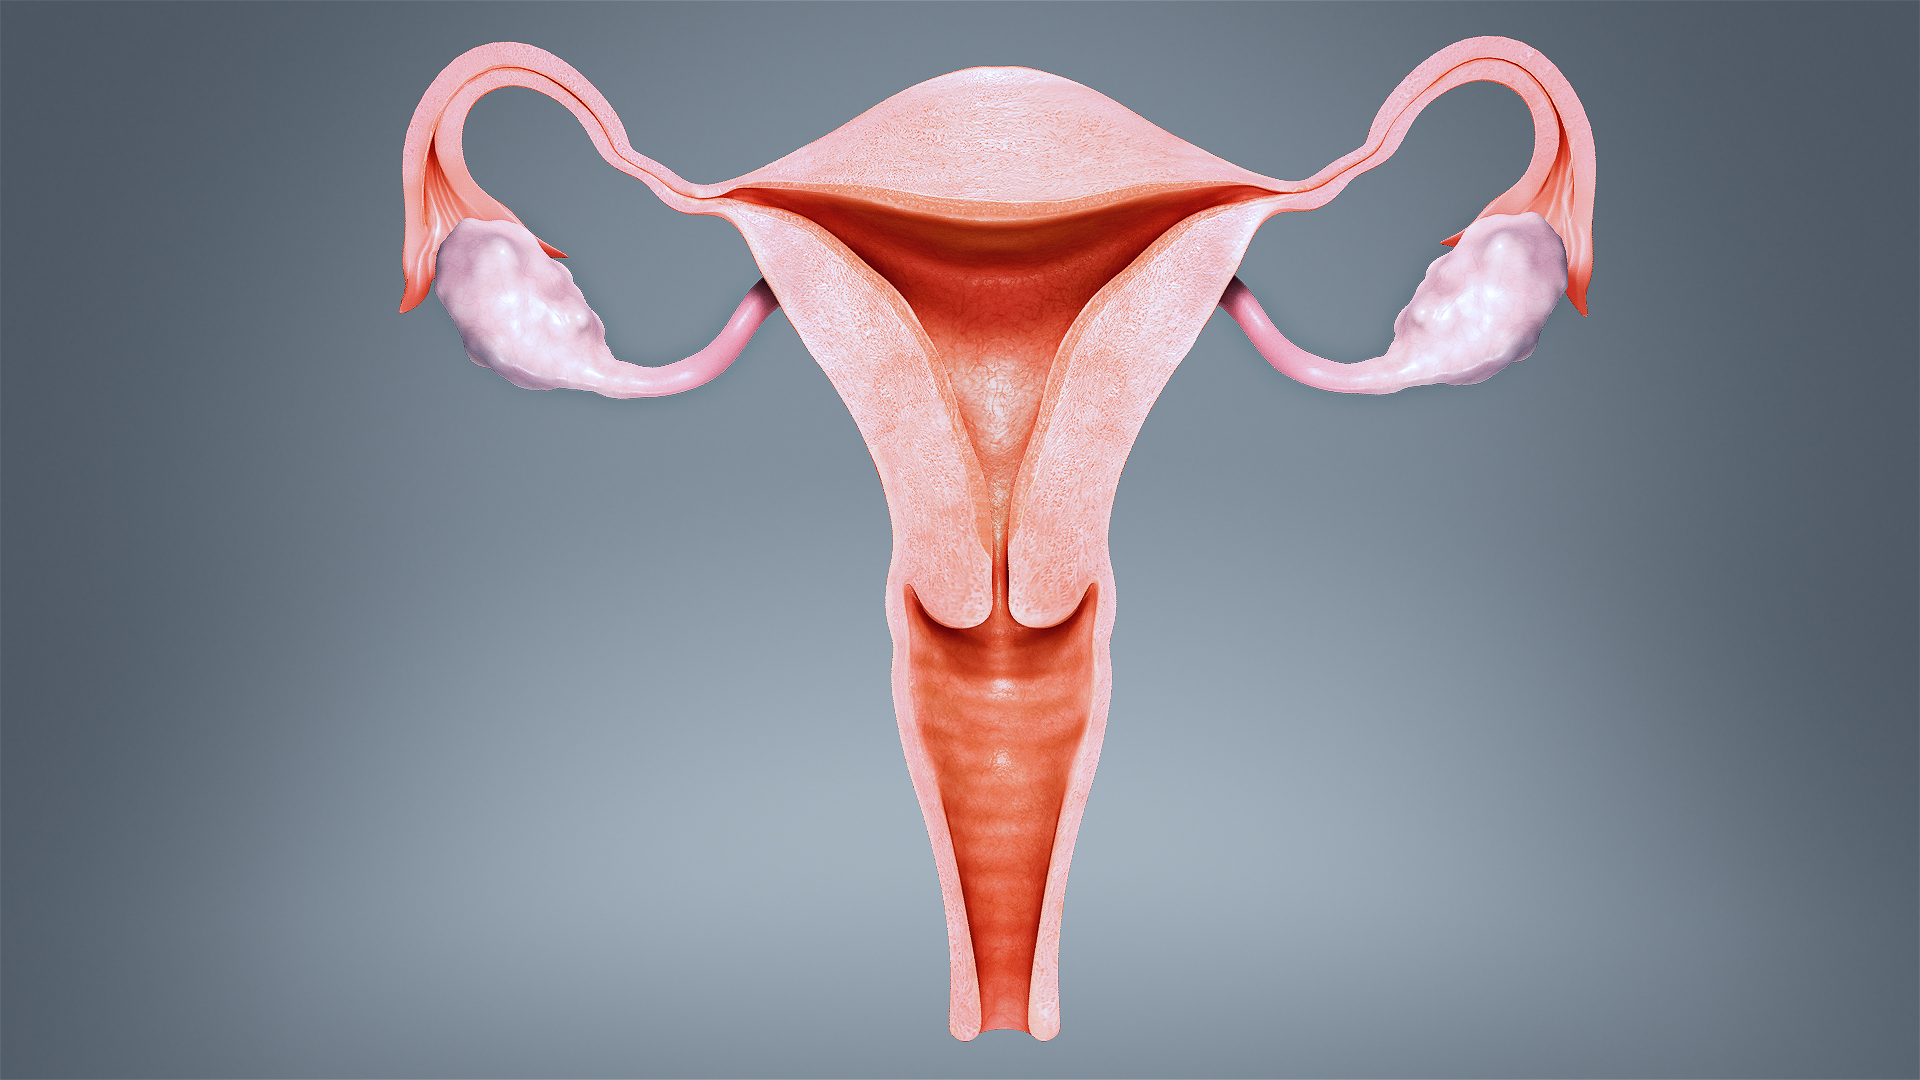 Uterus: Functions and Conditions - Scientific Animations